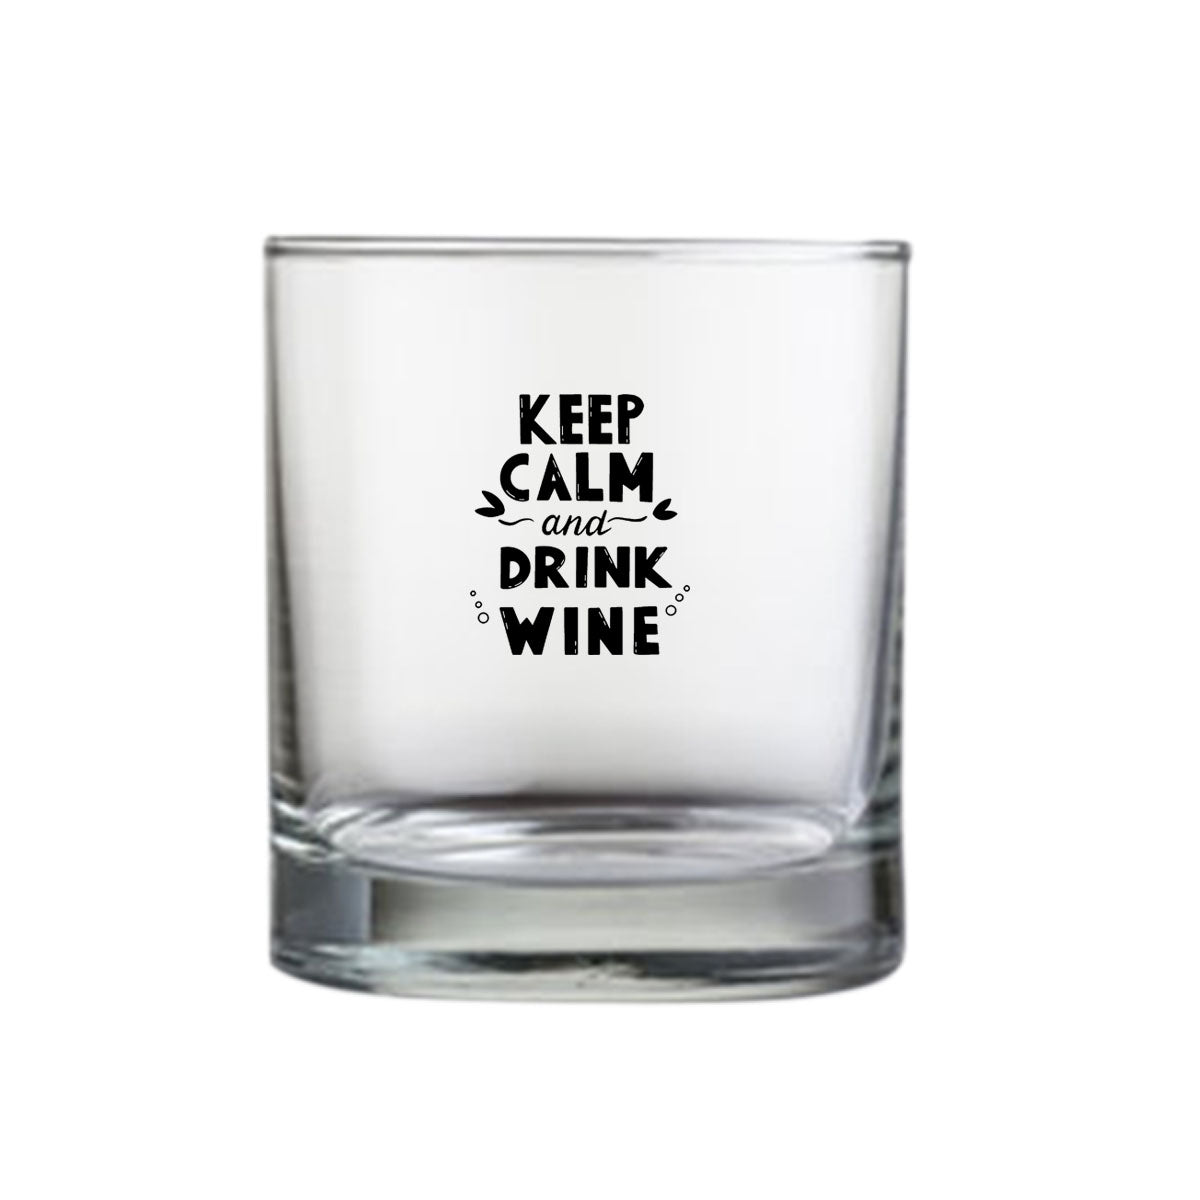 Whiskey Glasses with Design - Keep Calm Drink Wine